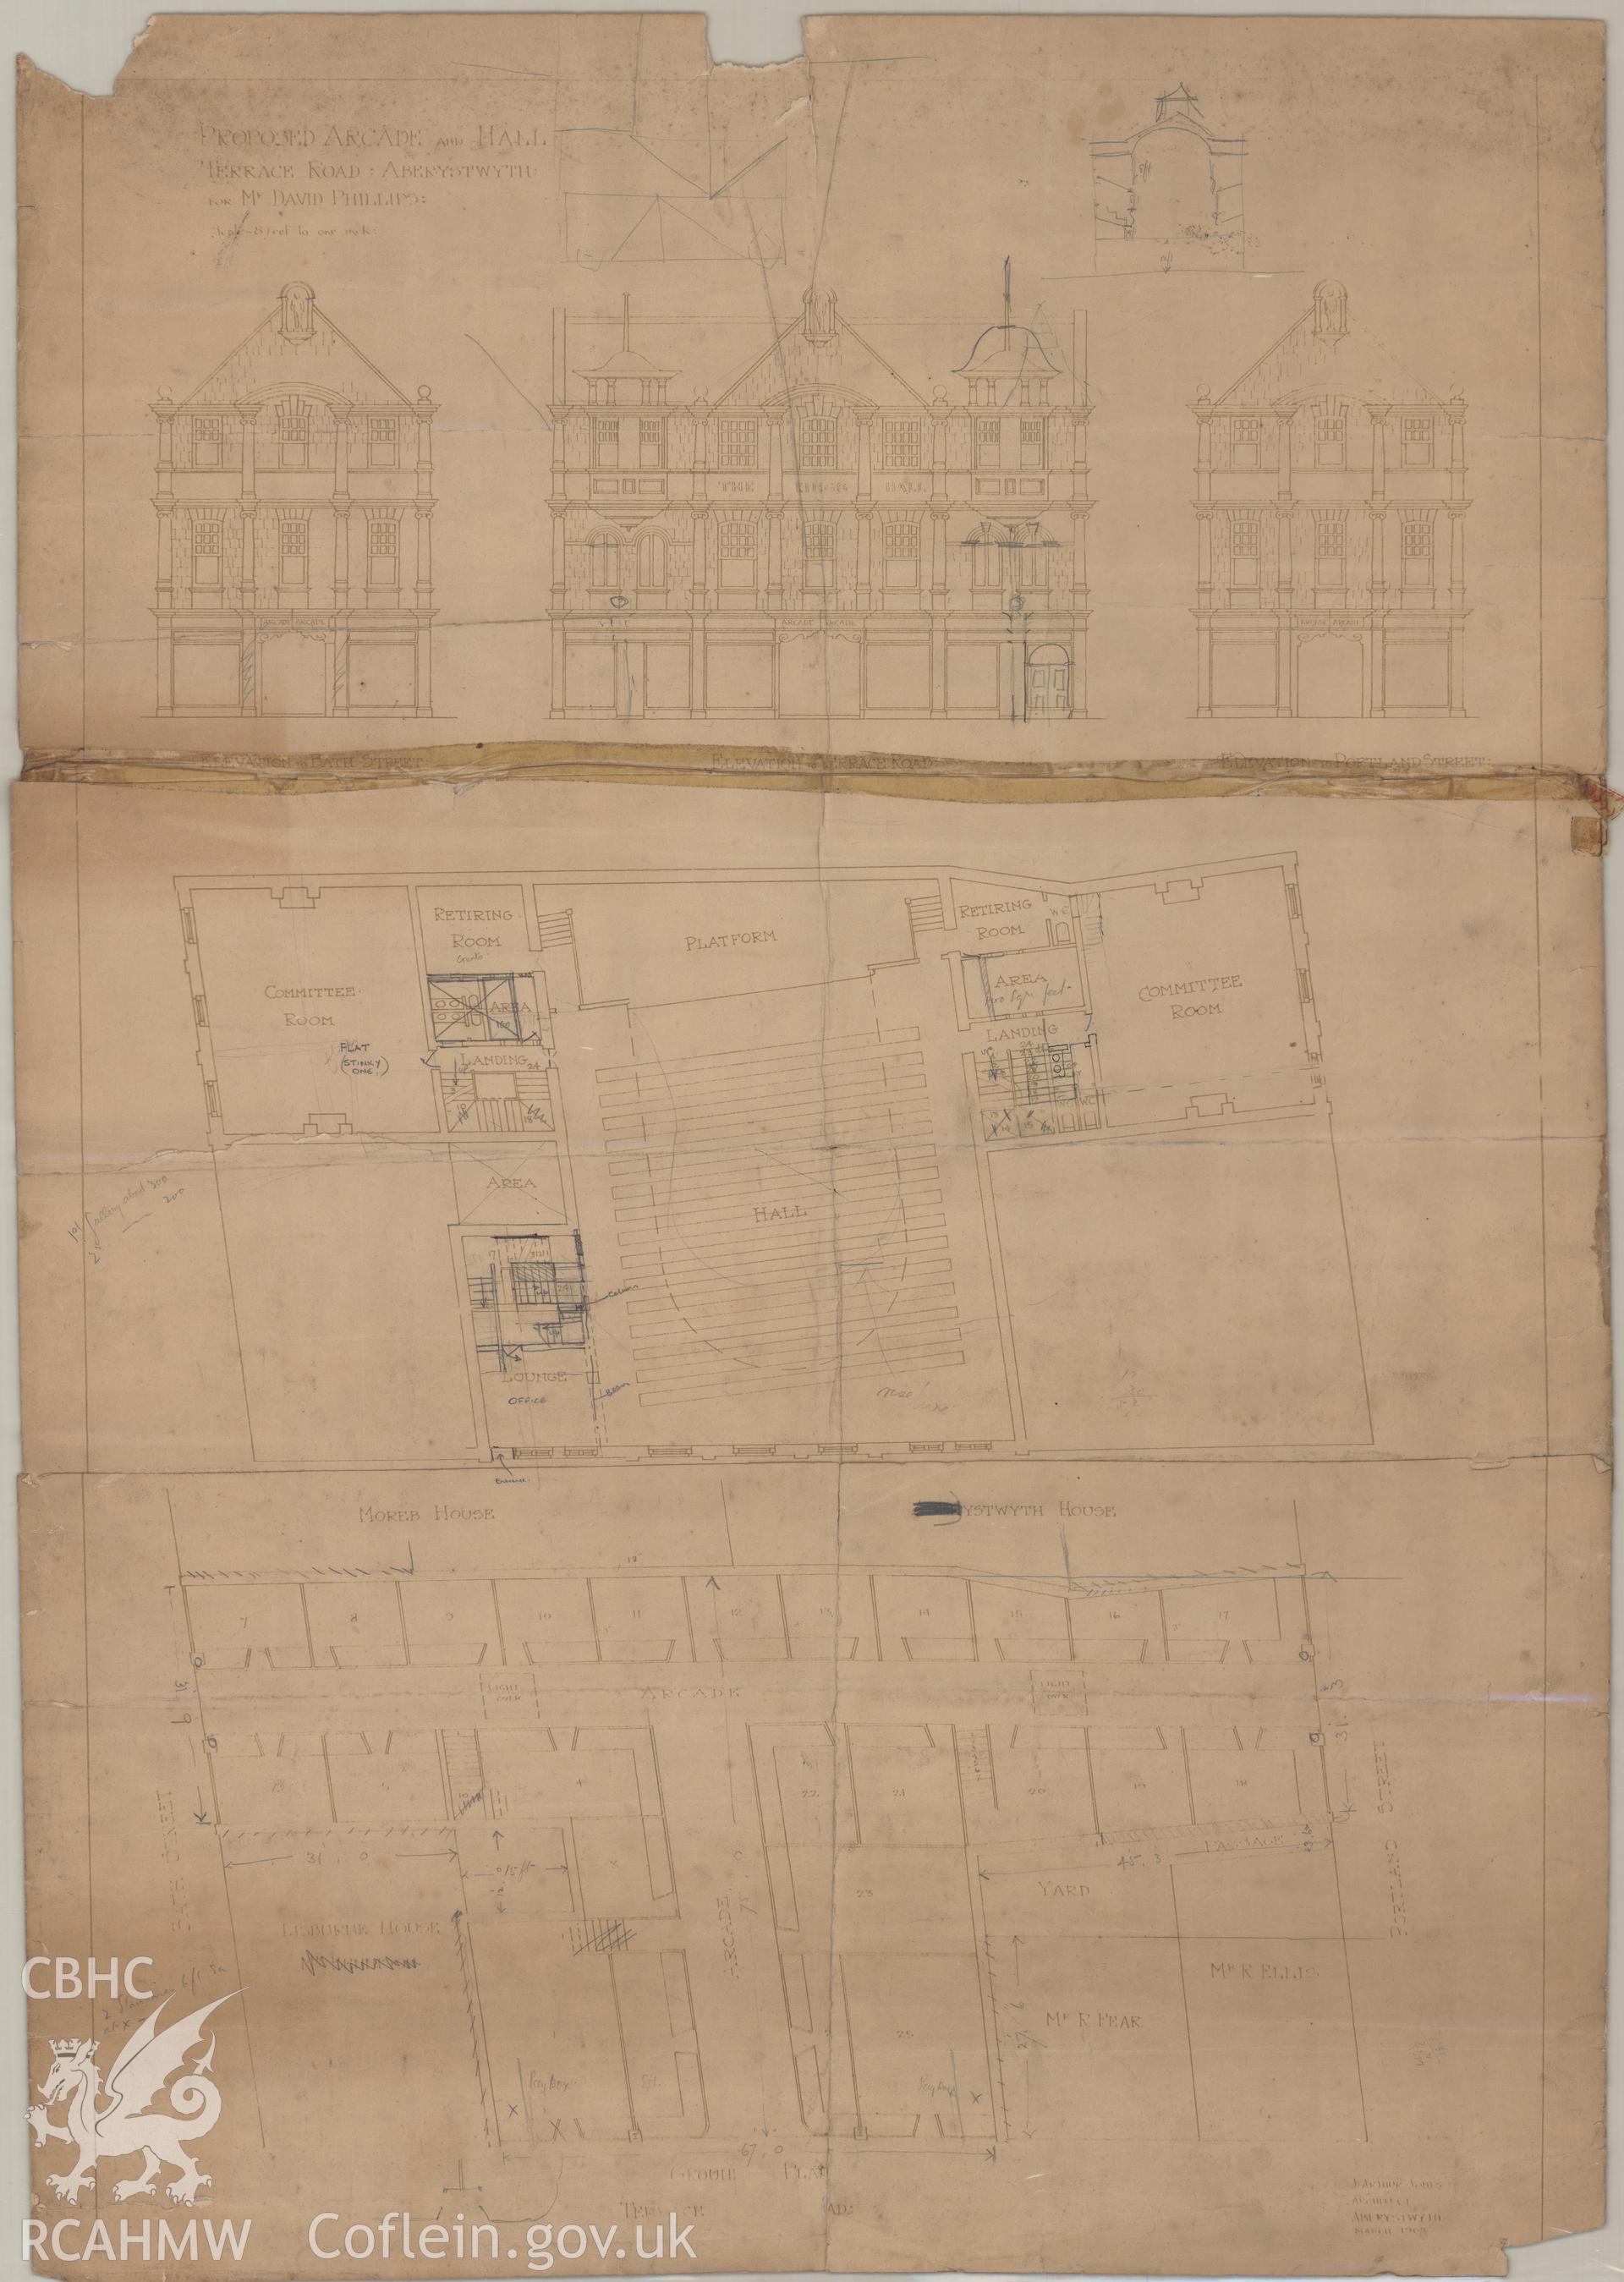 Plans and elevations of The Coliseum, Aberystwyth as proposed,  produced by J. Arthur Jones.